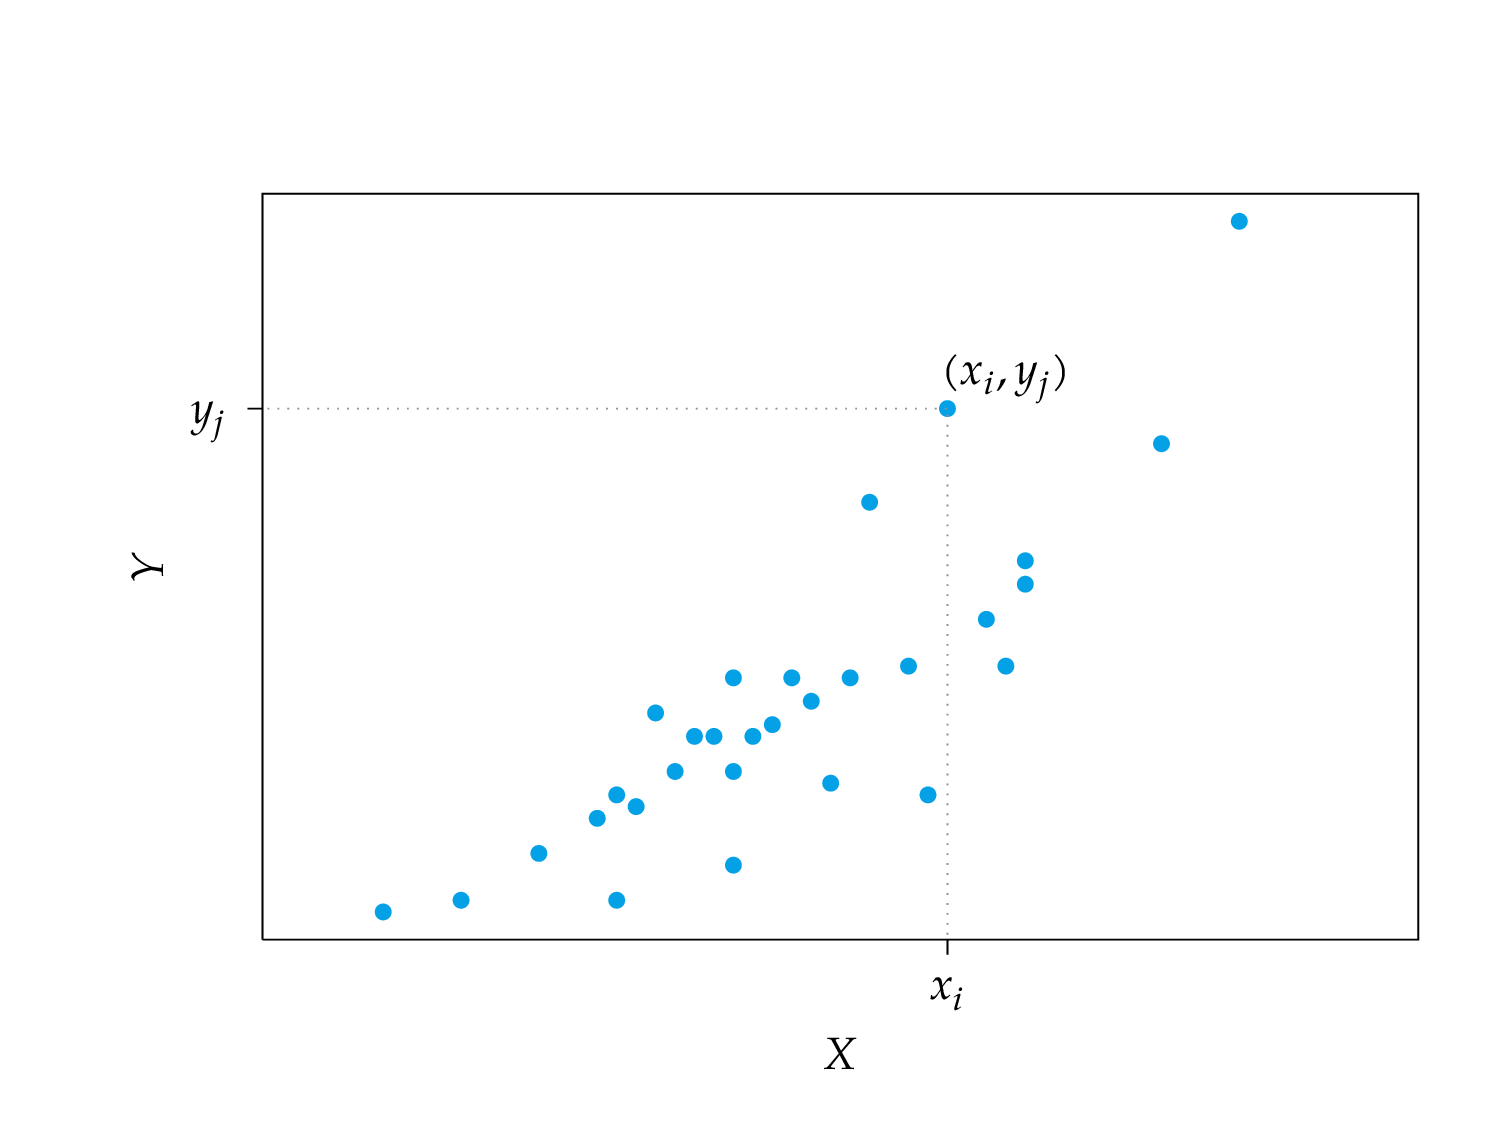 Variation decomposition by regression model